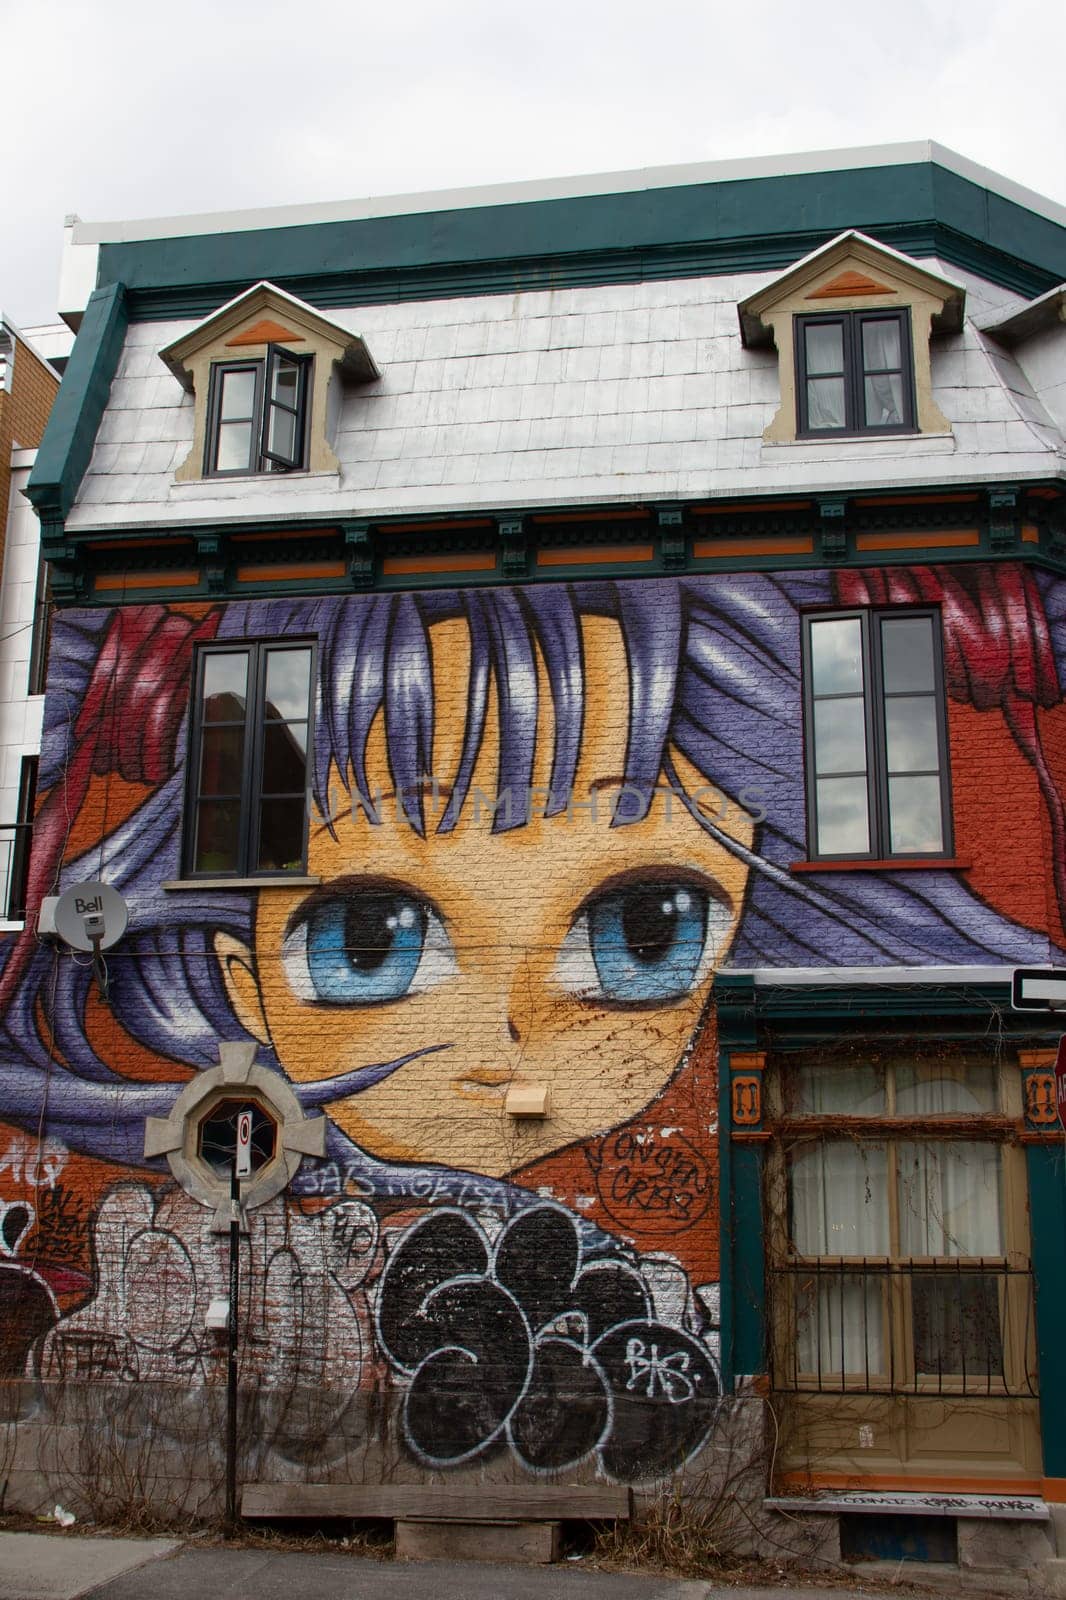 Creative graffiti street art mural lining a house of Montreal, Quebec, Canada. A house with a painting of a girl with purple hair and blue eyes.